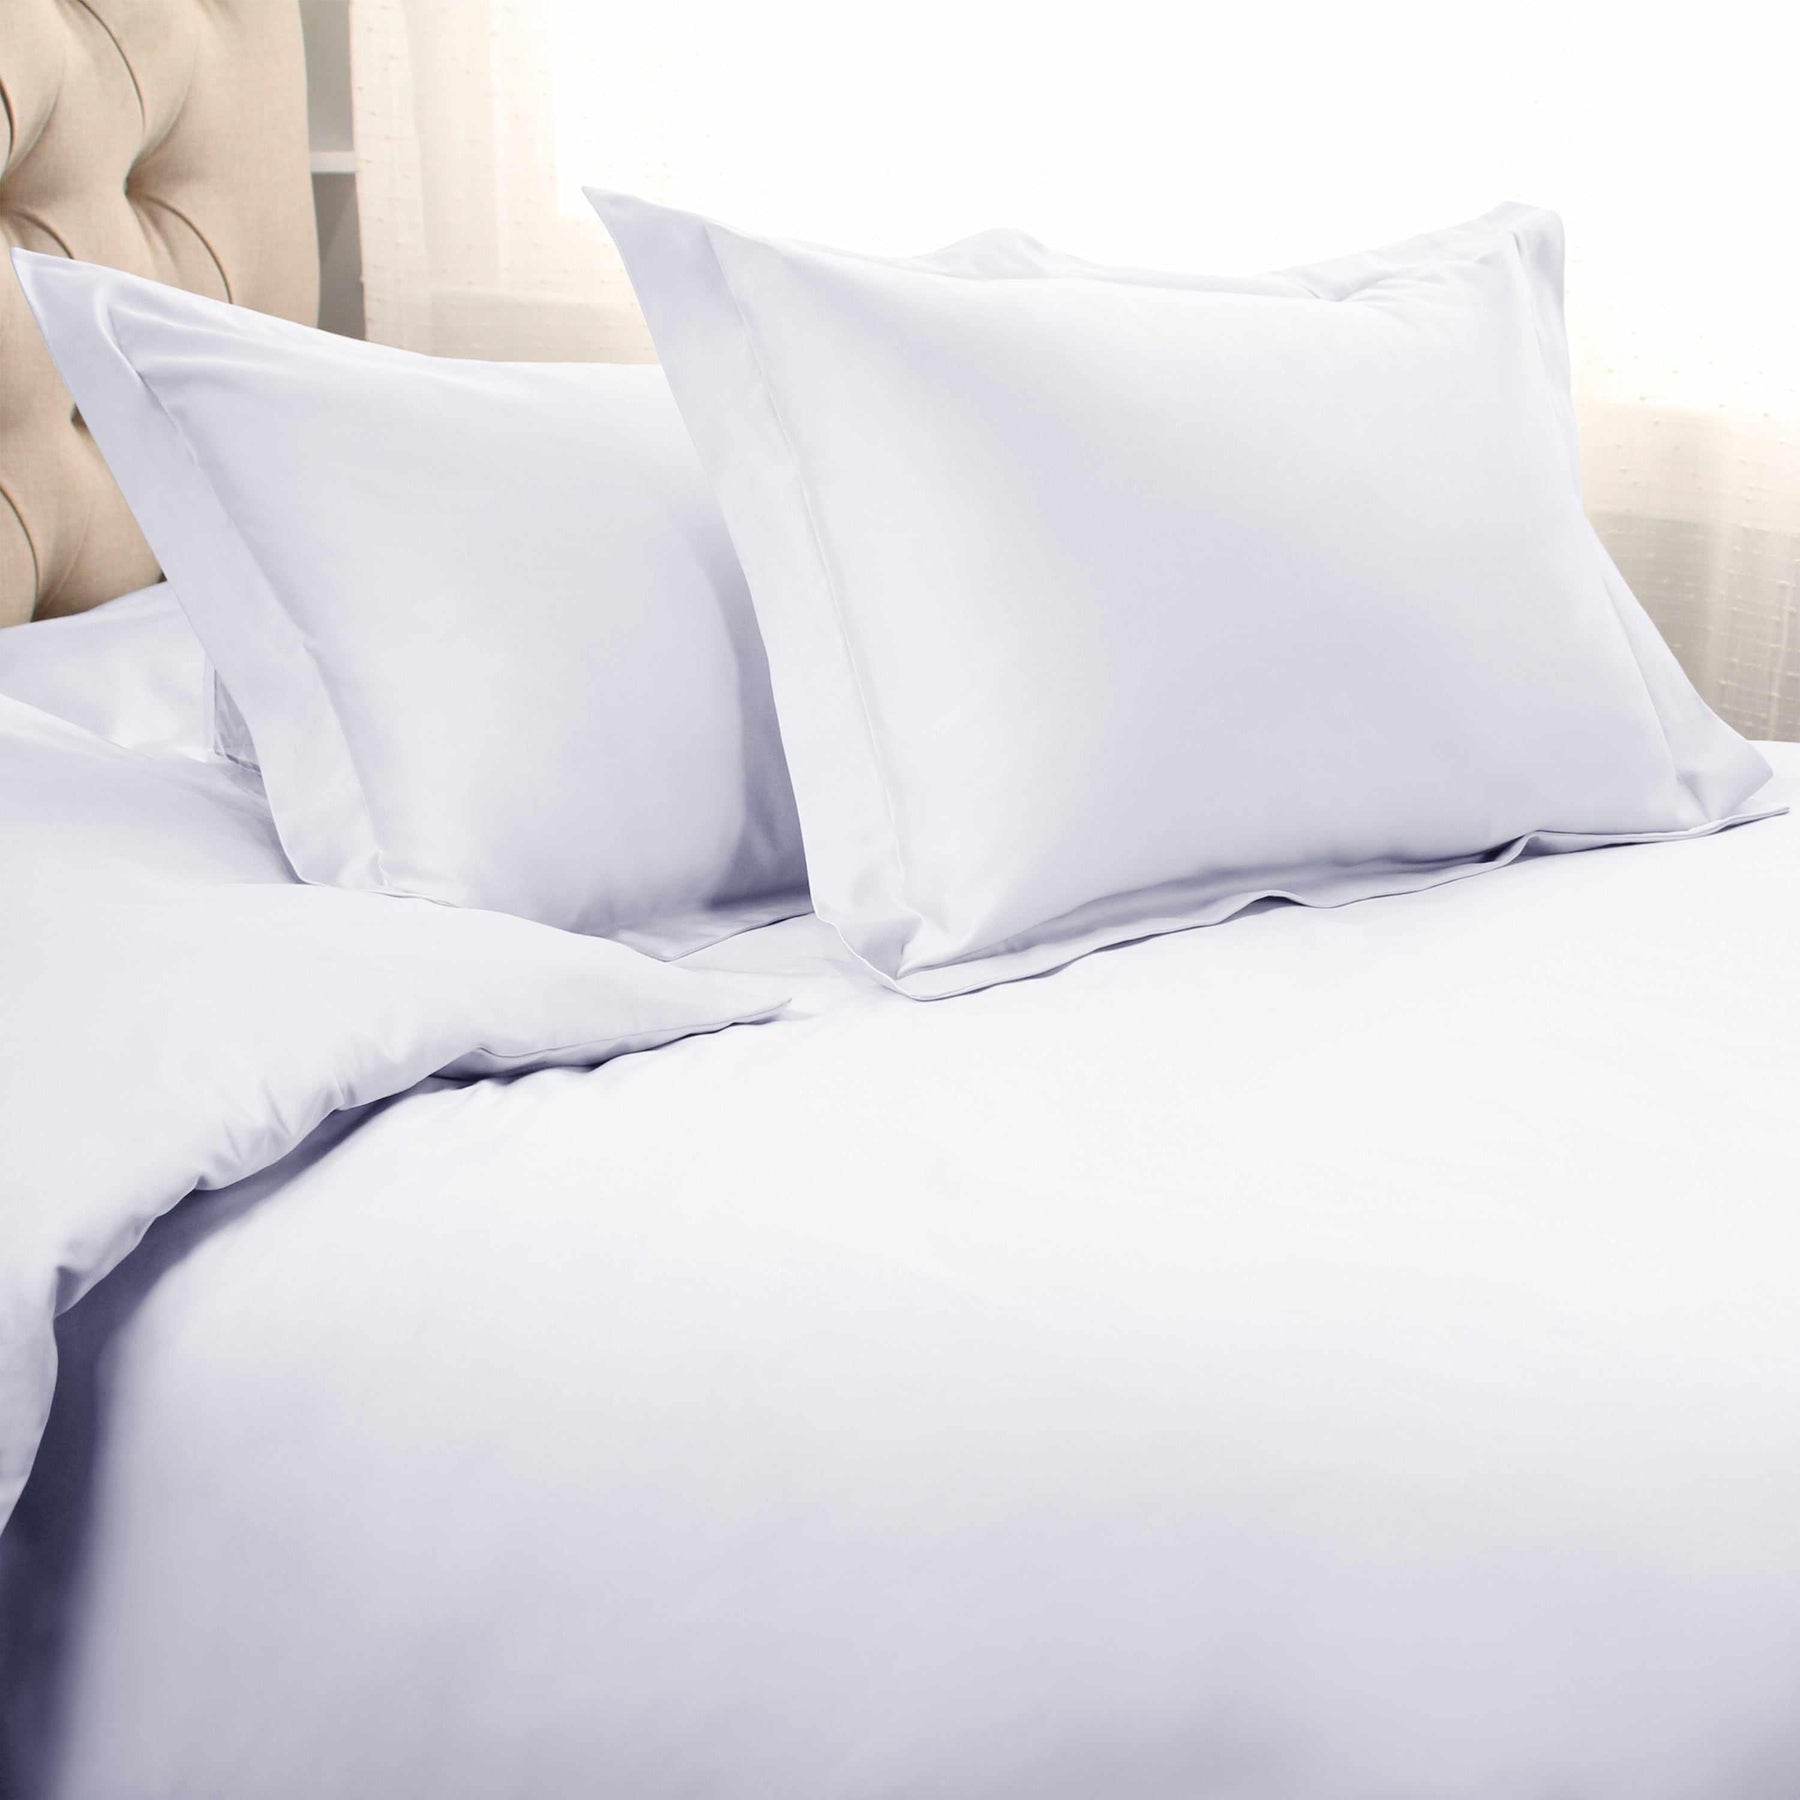  Superior Egyptian Cotton Solid All-Season Duvet Cover Set with Button Closure - White